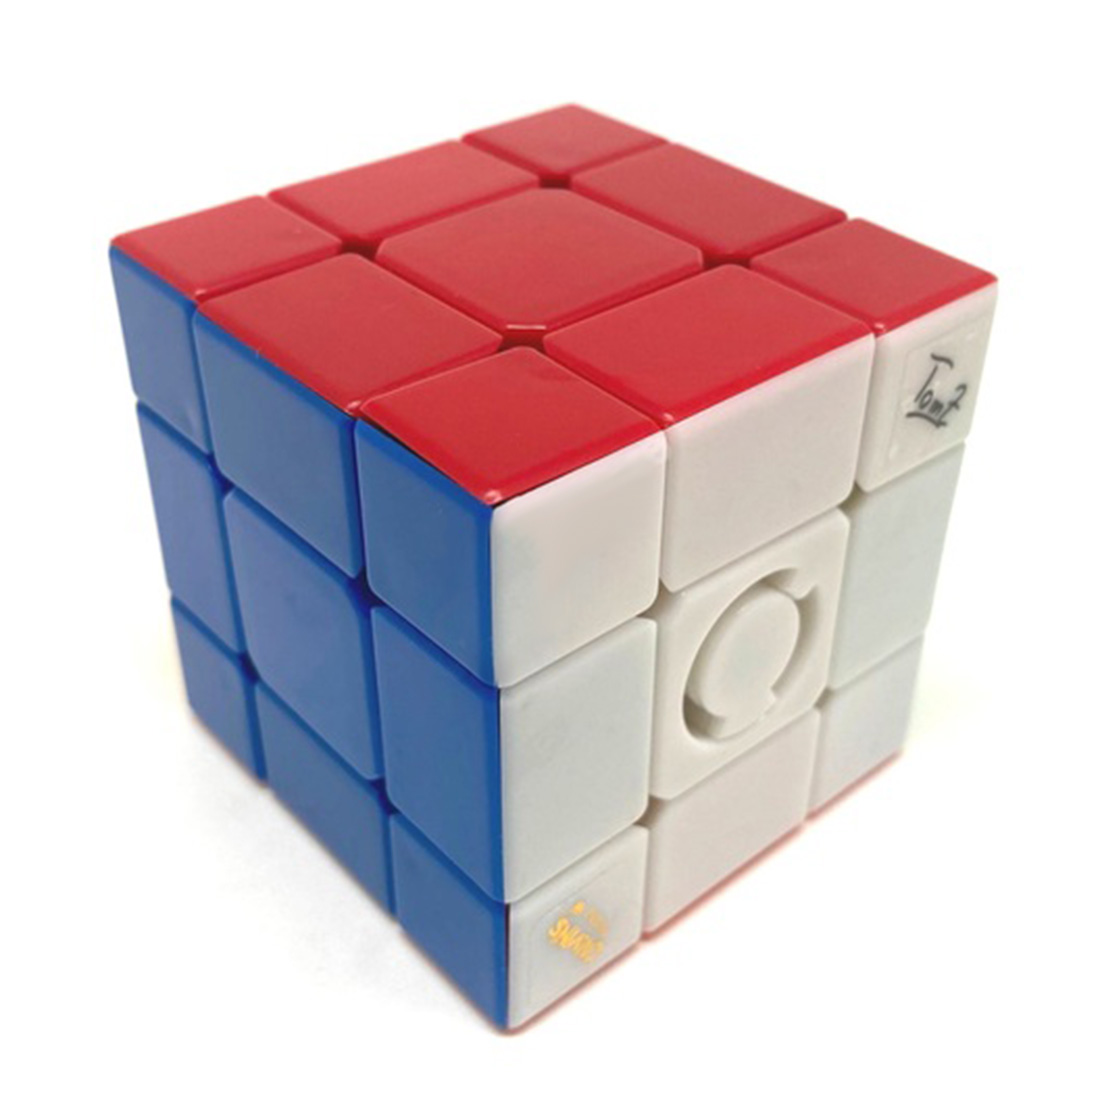 TomZ Constrained 3x3 Mixup Cube 270 Degree